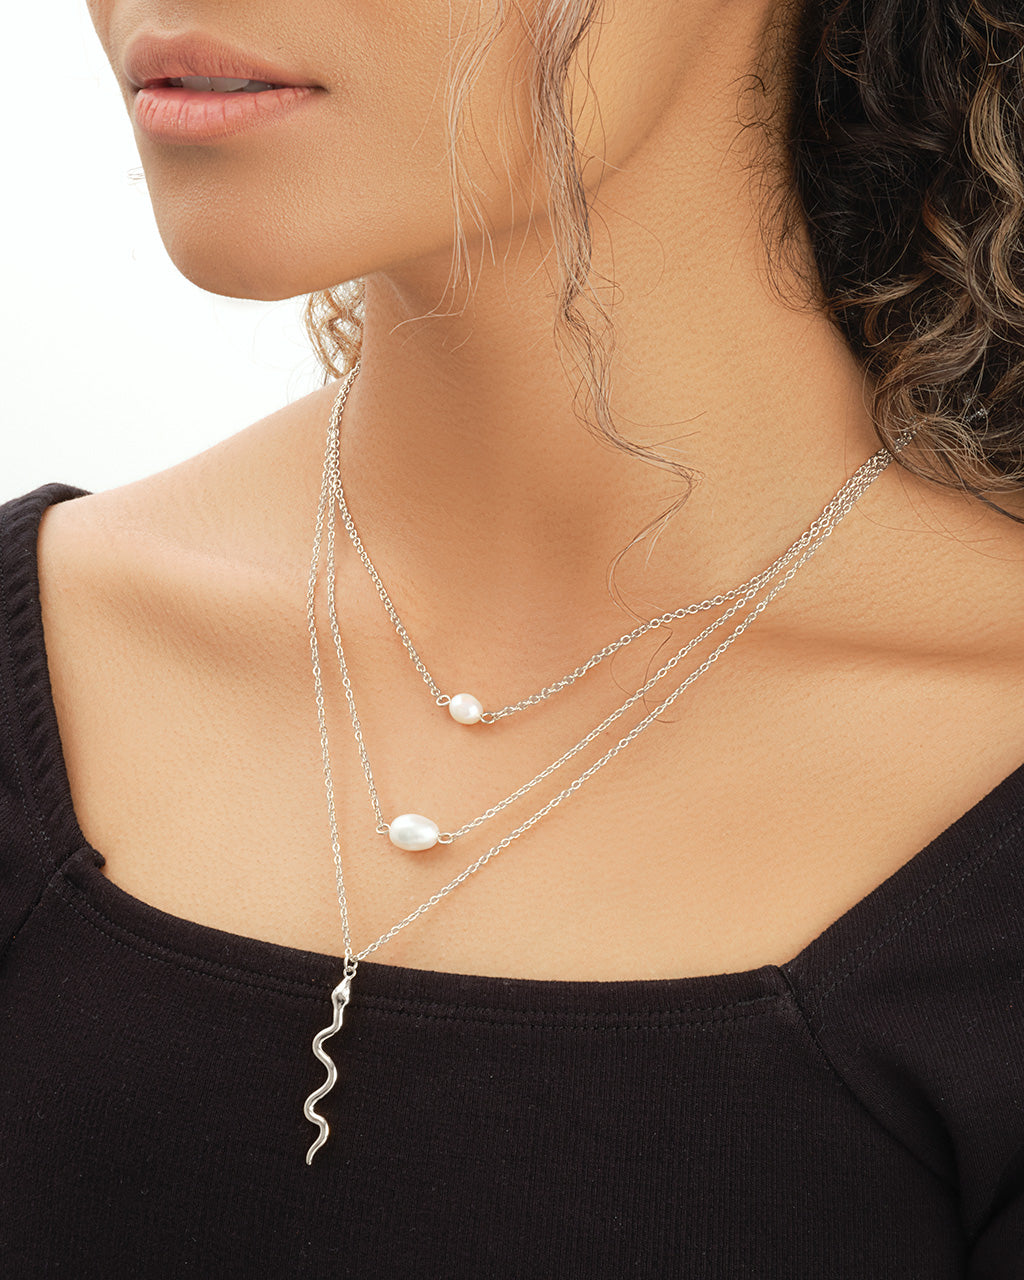 Wriggling Snake & Pearl Layered Necklace Necklace Sterling Forever 